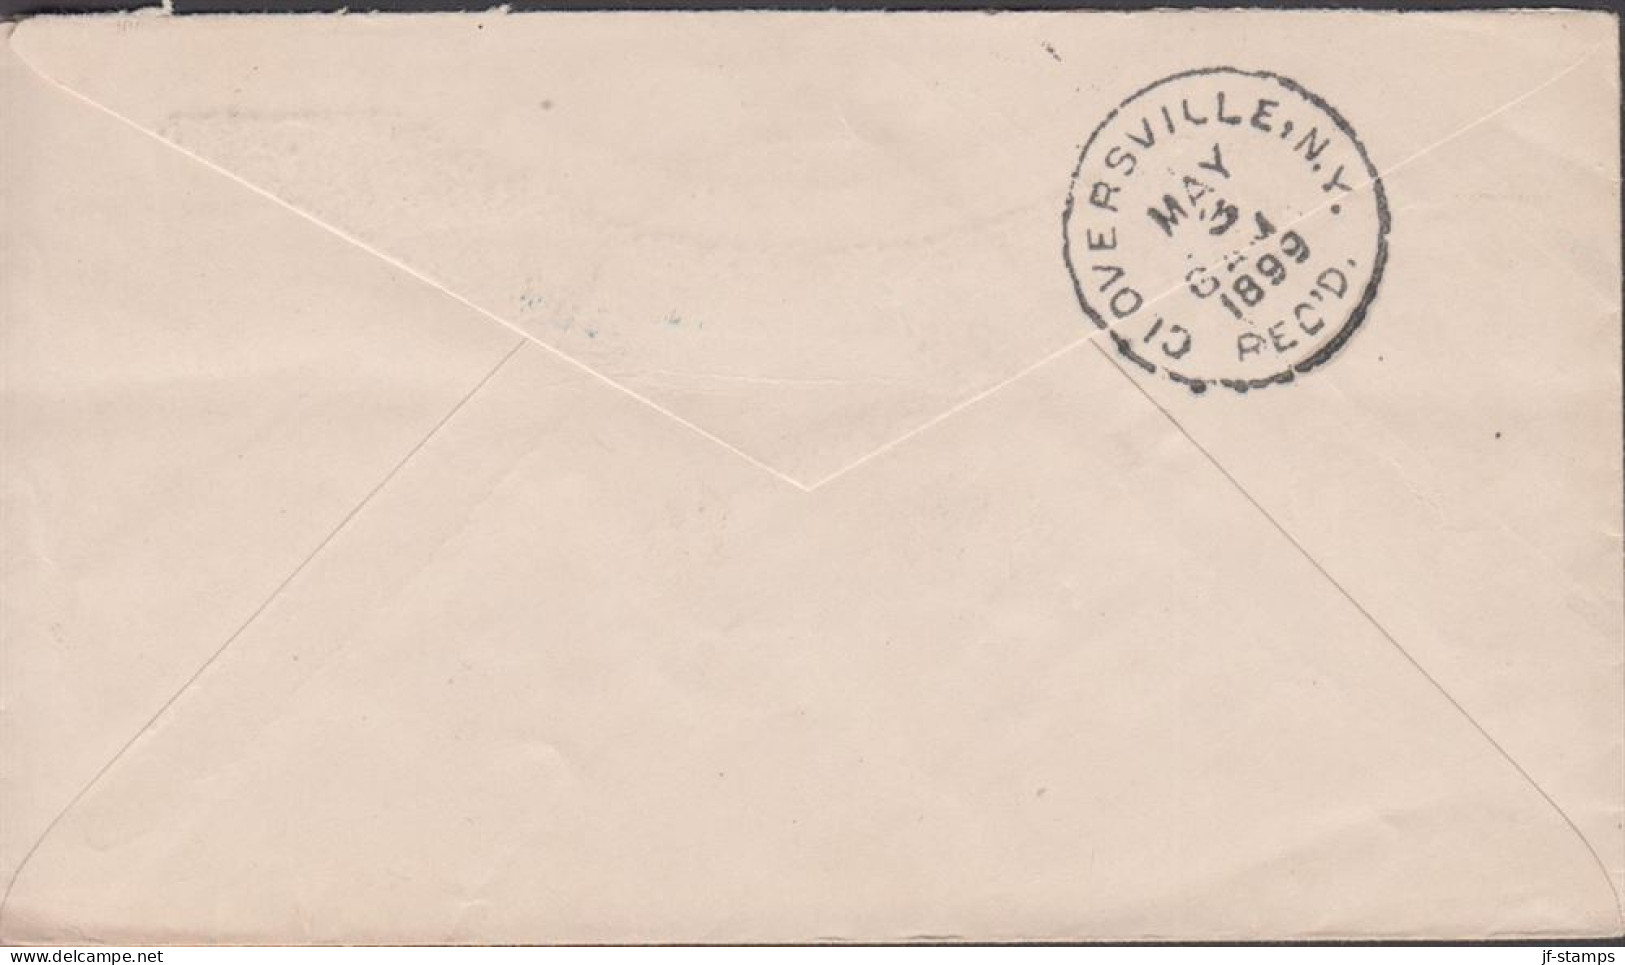 1899. CANADA, Victoria. 2 CENTS On Cover To Cloversville, USA Cancelled WINNIPIG 7 AP 29 99 CA... (Michel 64) - JF439376 - Cartas & Documentos